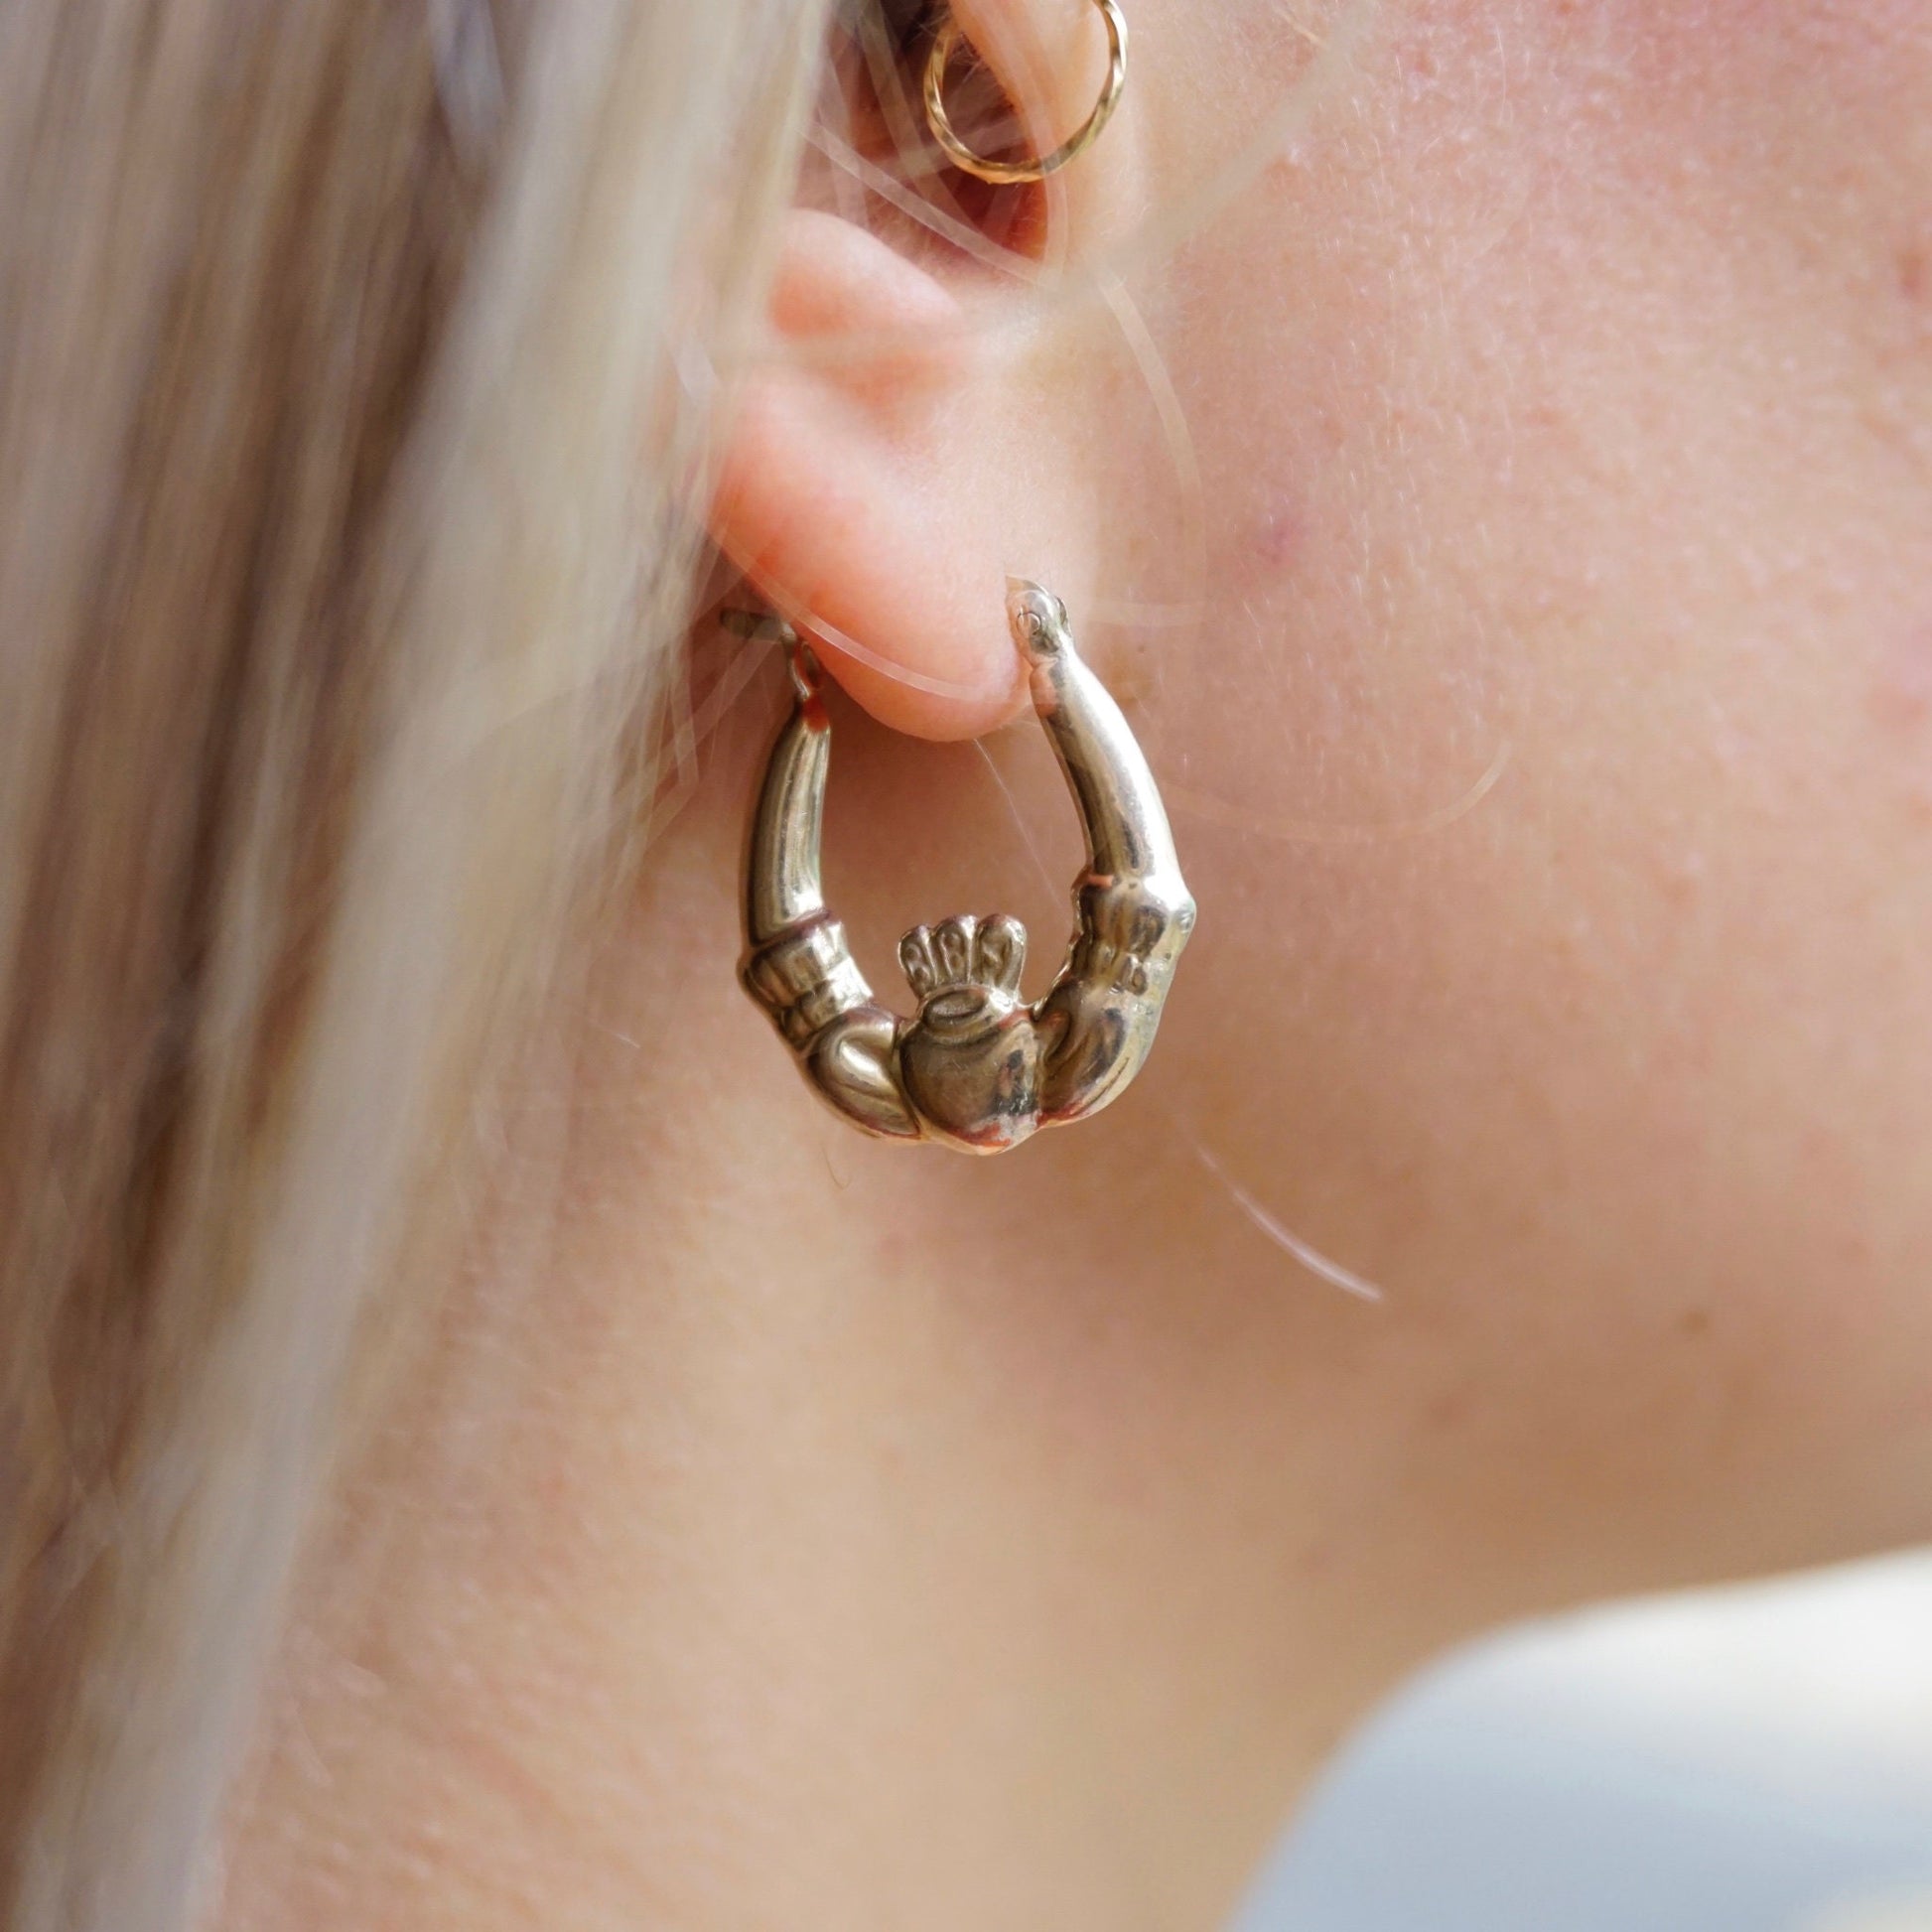 Close-up of a woman wearing vintage sterling silver Claddagh hoop earrings, embodying the classic Irish symbol of love, loyalty, and friendship, crafted from 925 sterling silver jewelry.